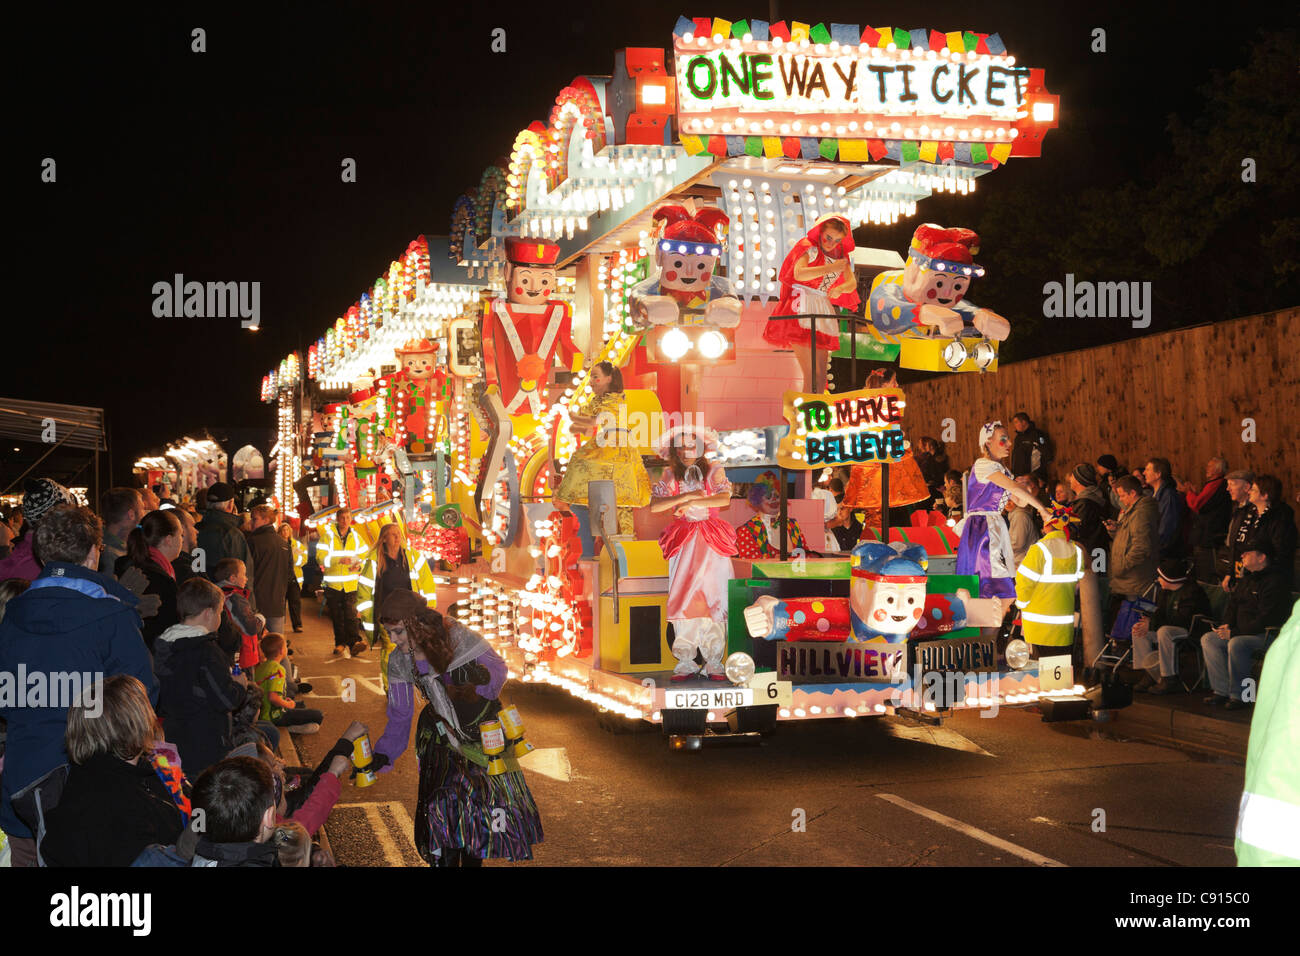 One Way Ticket (To Make Believe) by Hillview Junior Carnival Club. Stock Photo